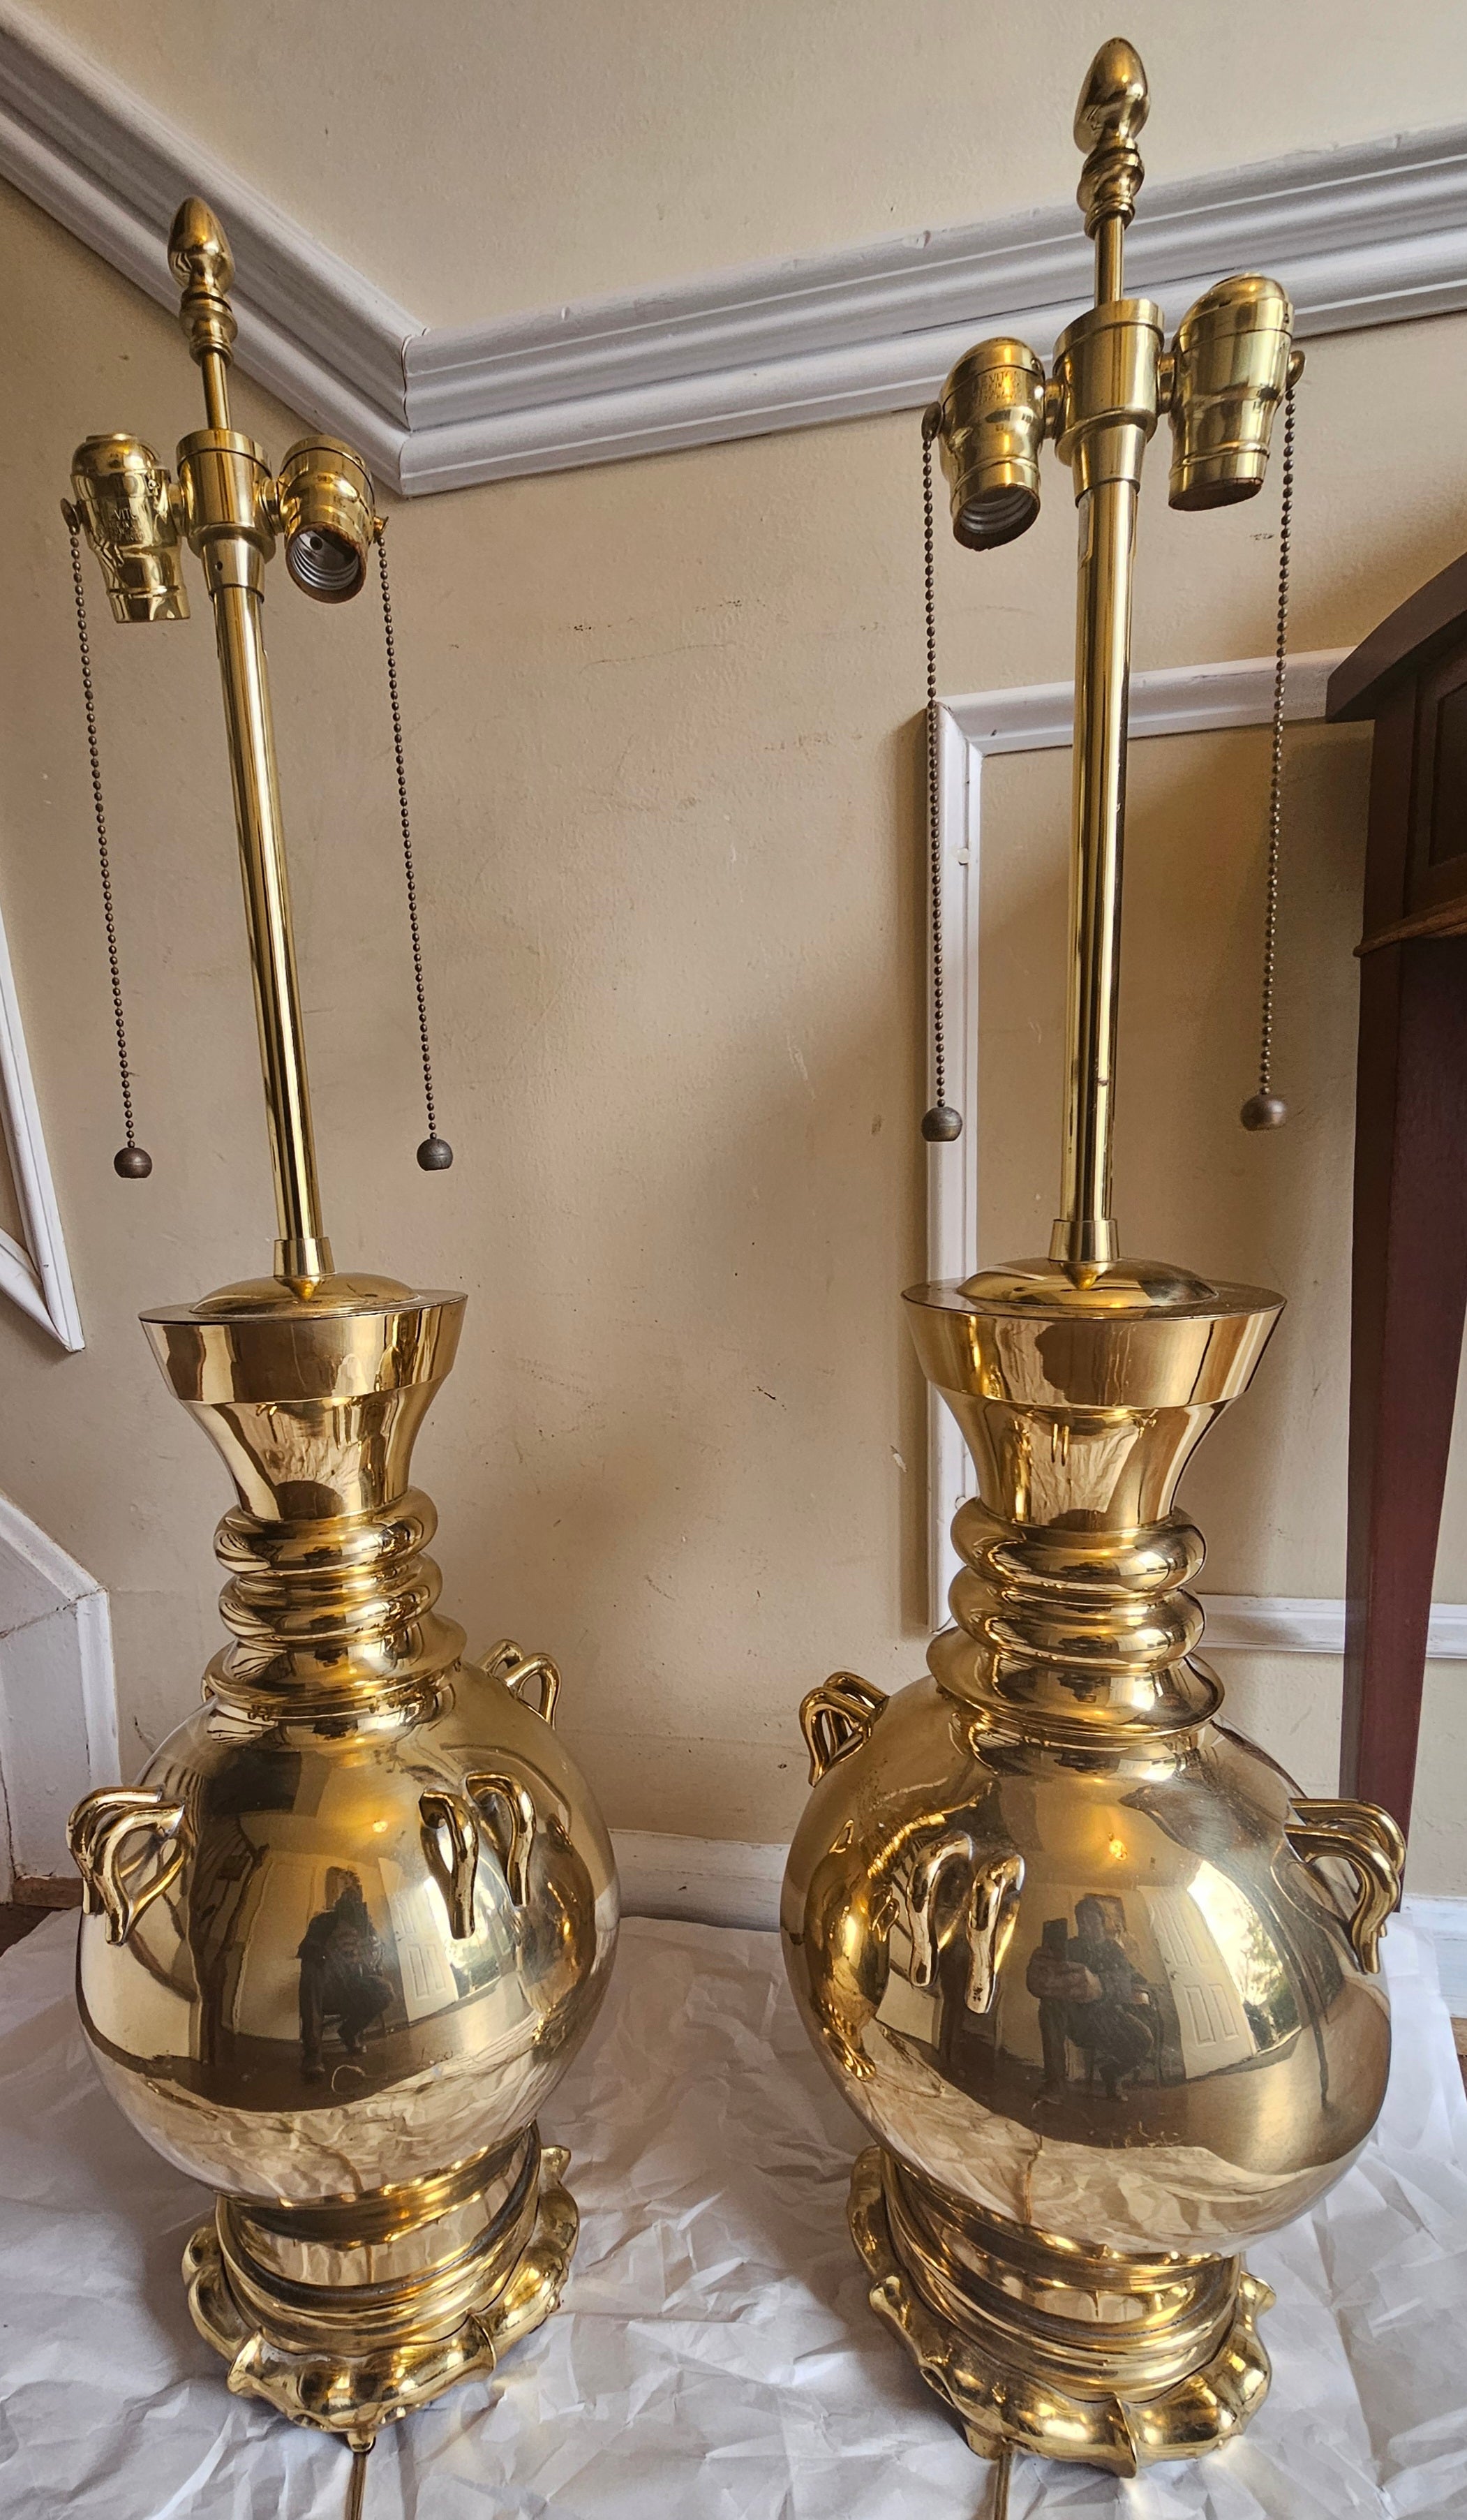 Pair of Marbro American Polished Brass Table Lamps In Good Condition For Sale In Germantown, MD